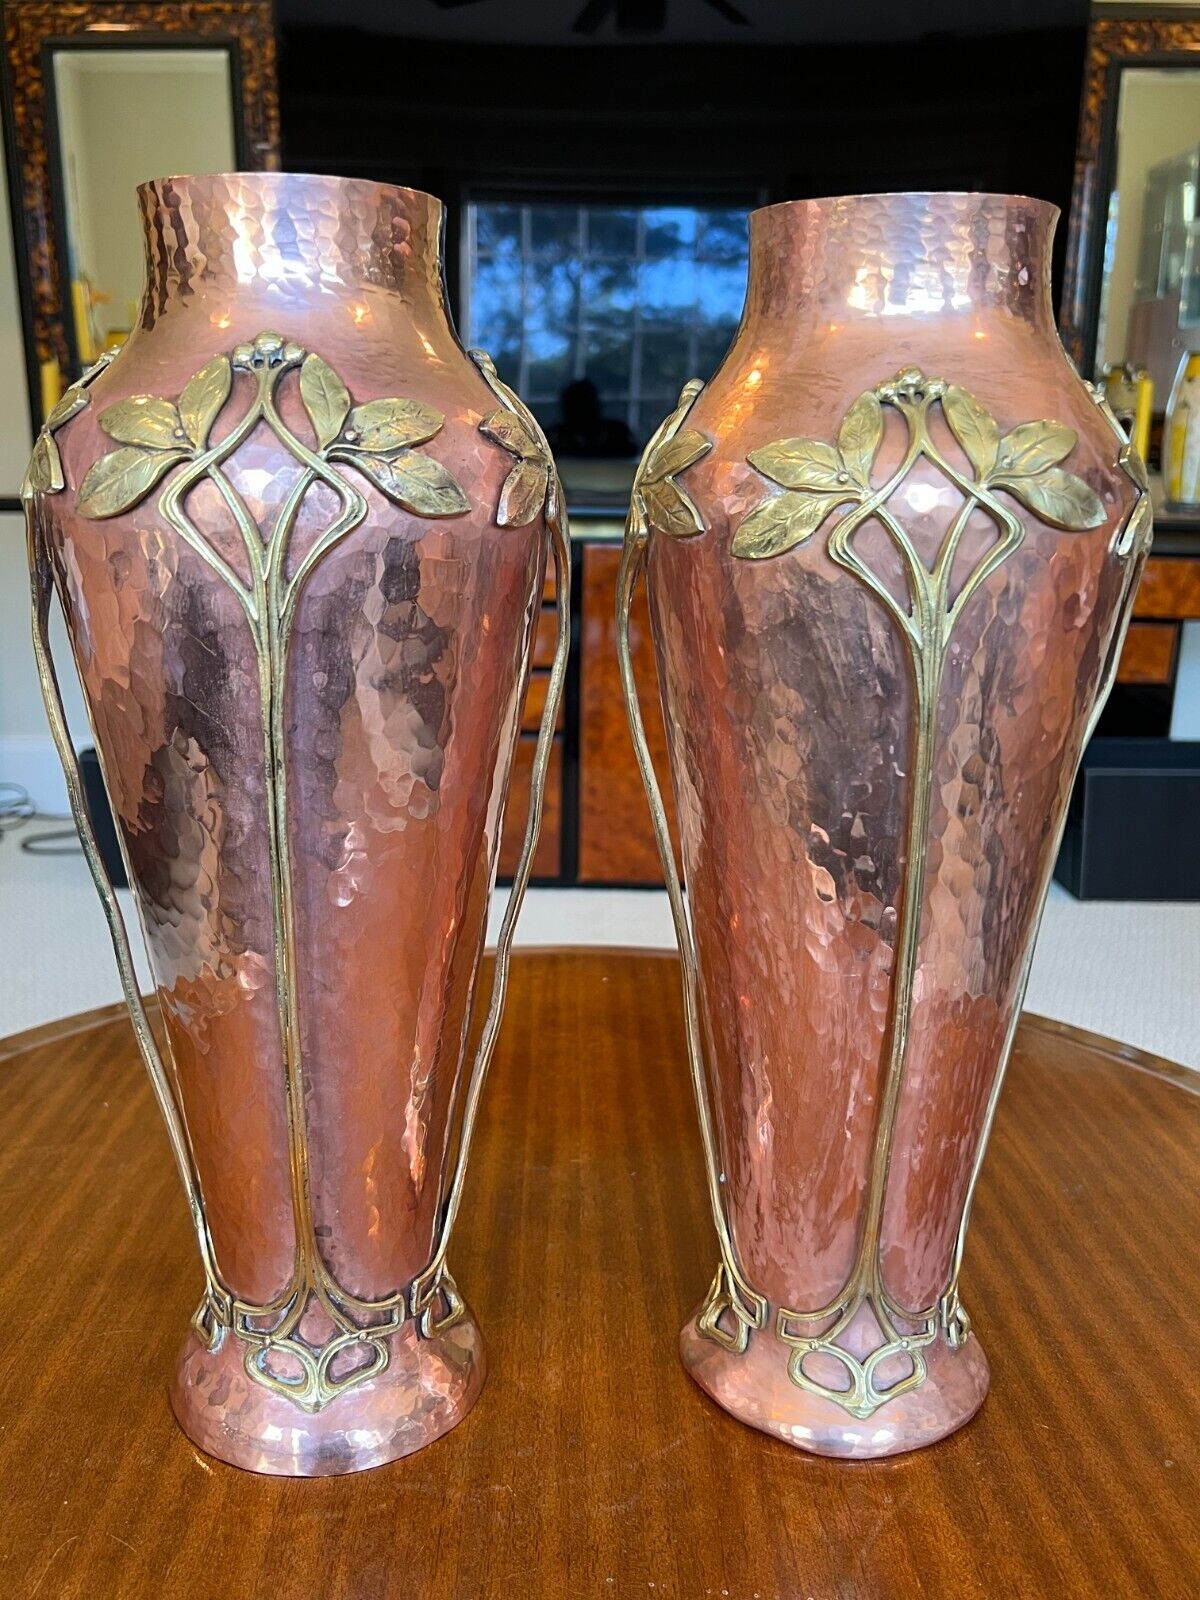 Wonderful Pair of Huge WMF Art Nouveau Copper and Brass Vases